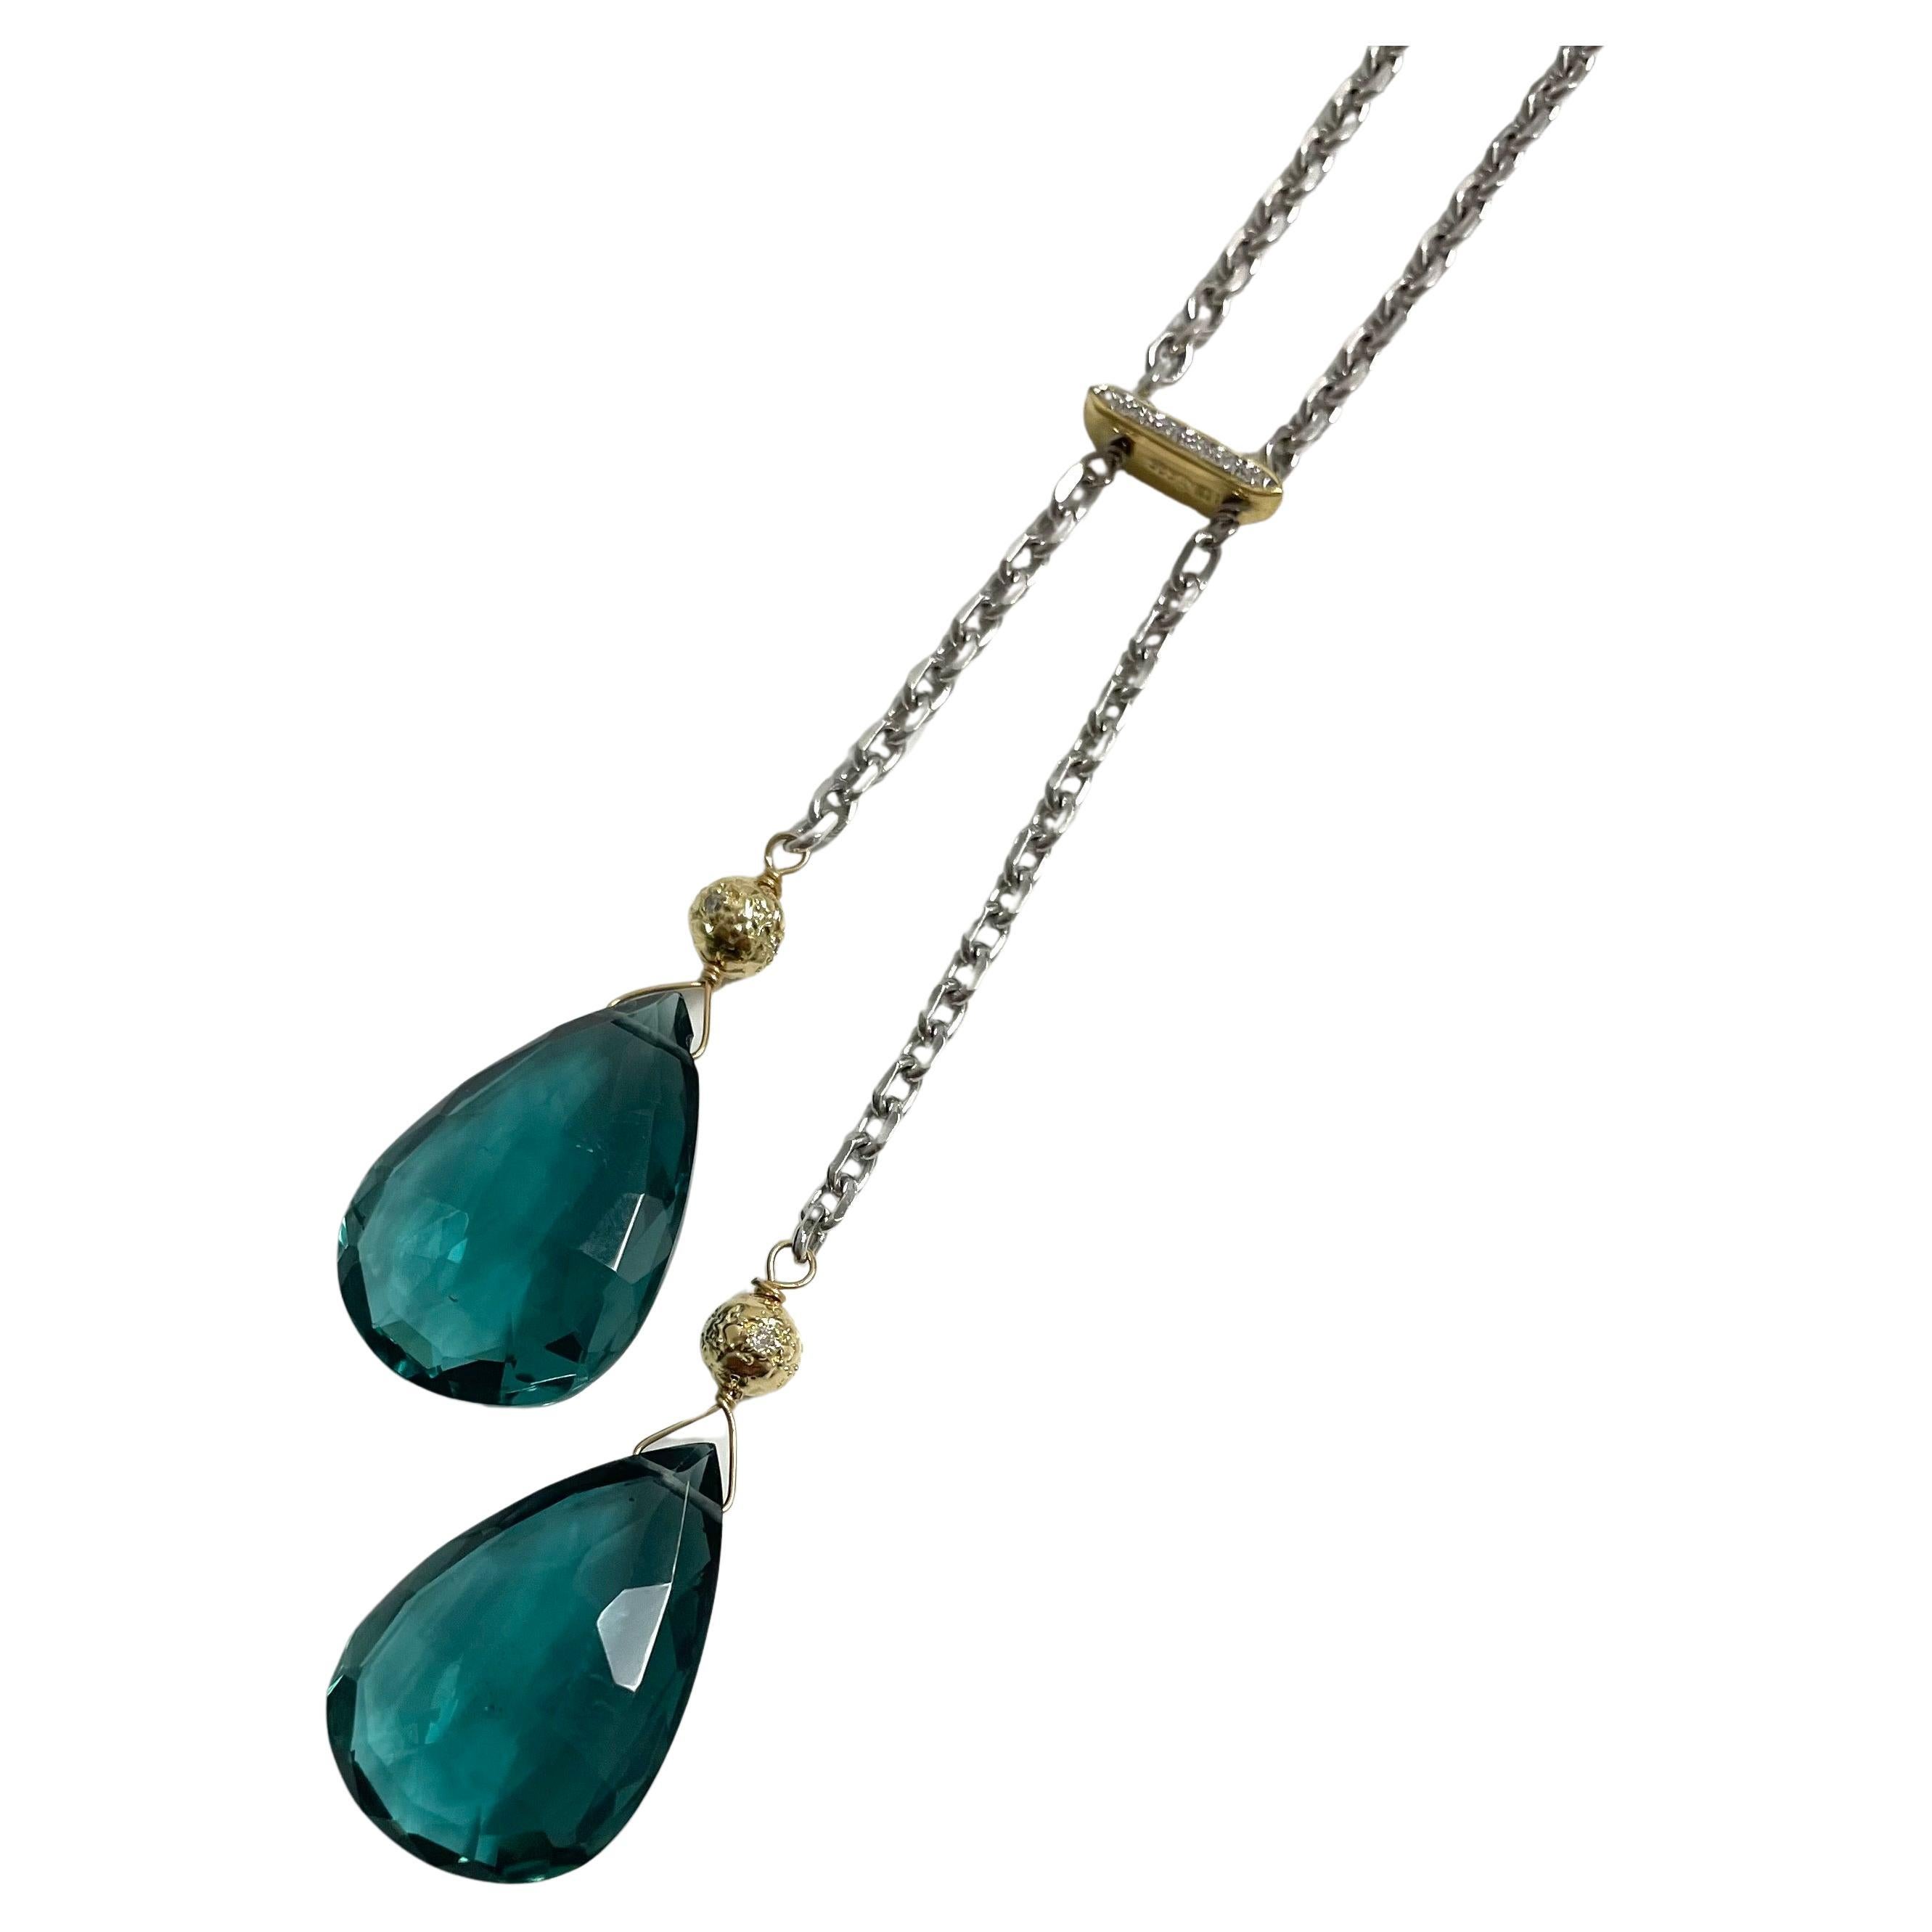 Description
Vibrant Teal Quartz double drops accented with diamonds and 14k yellow gold on a diamond cut 14k white gold chain.
Item # N3706

Materials and Weight
Teal quartz 34cts, 25 x 16 mm, pear shape
Pave diamonds
14k yellow gold pave diamond